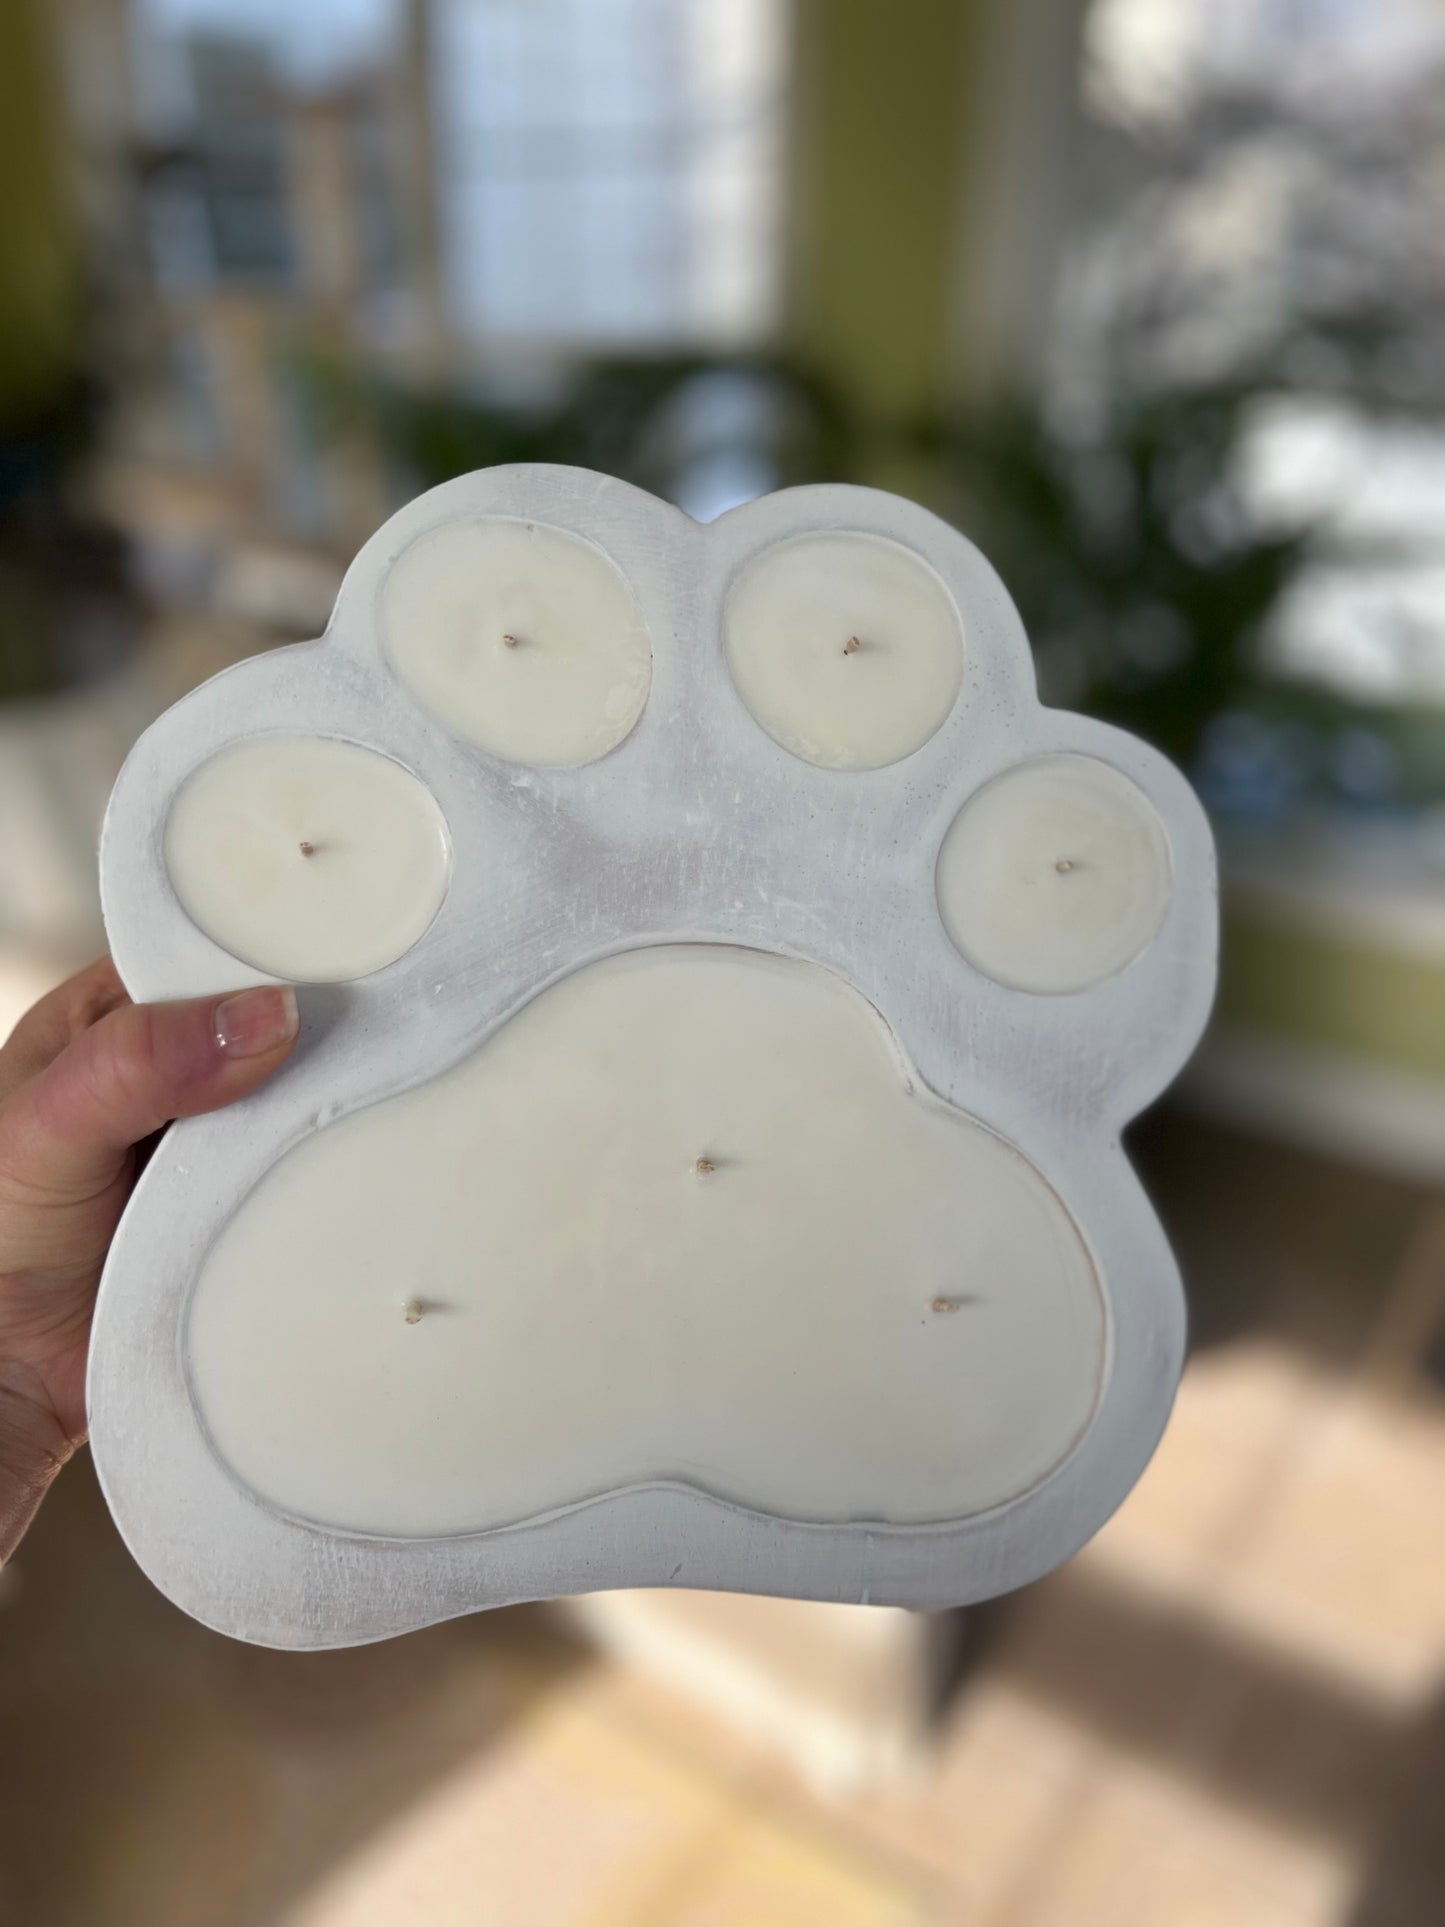 PawPrint Rustic Glow Candles